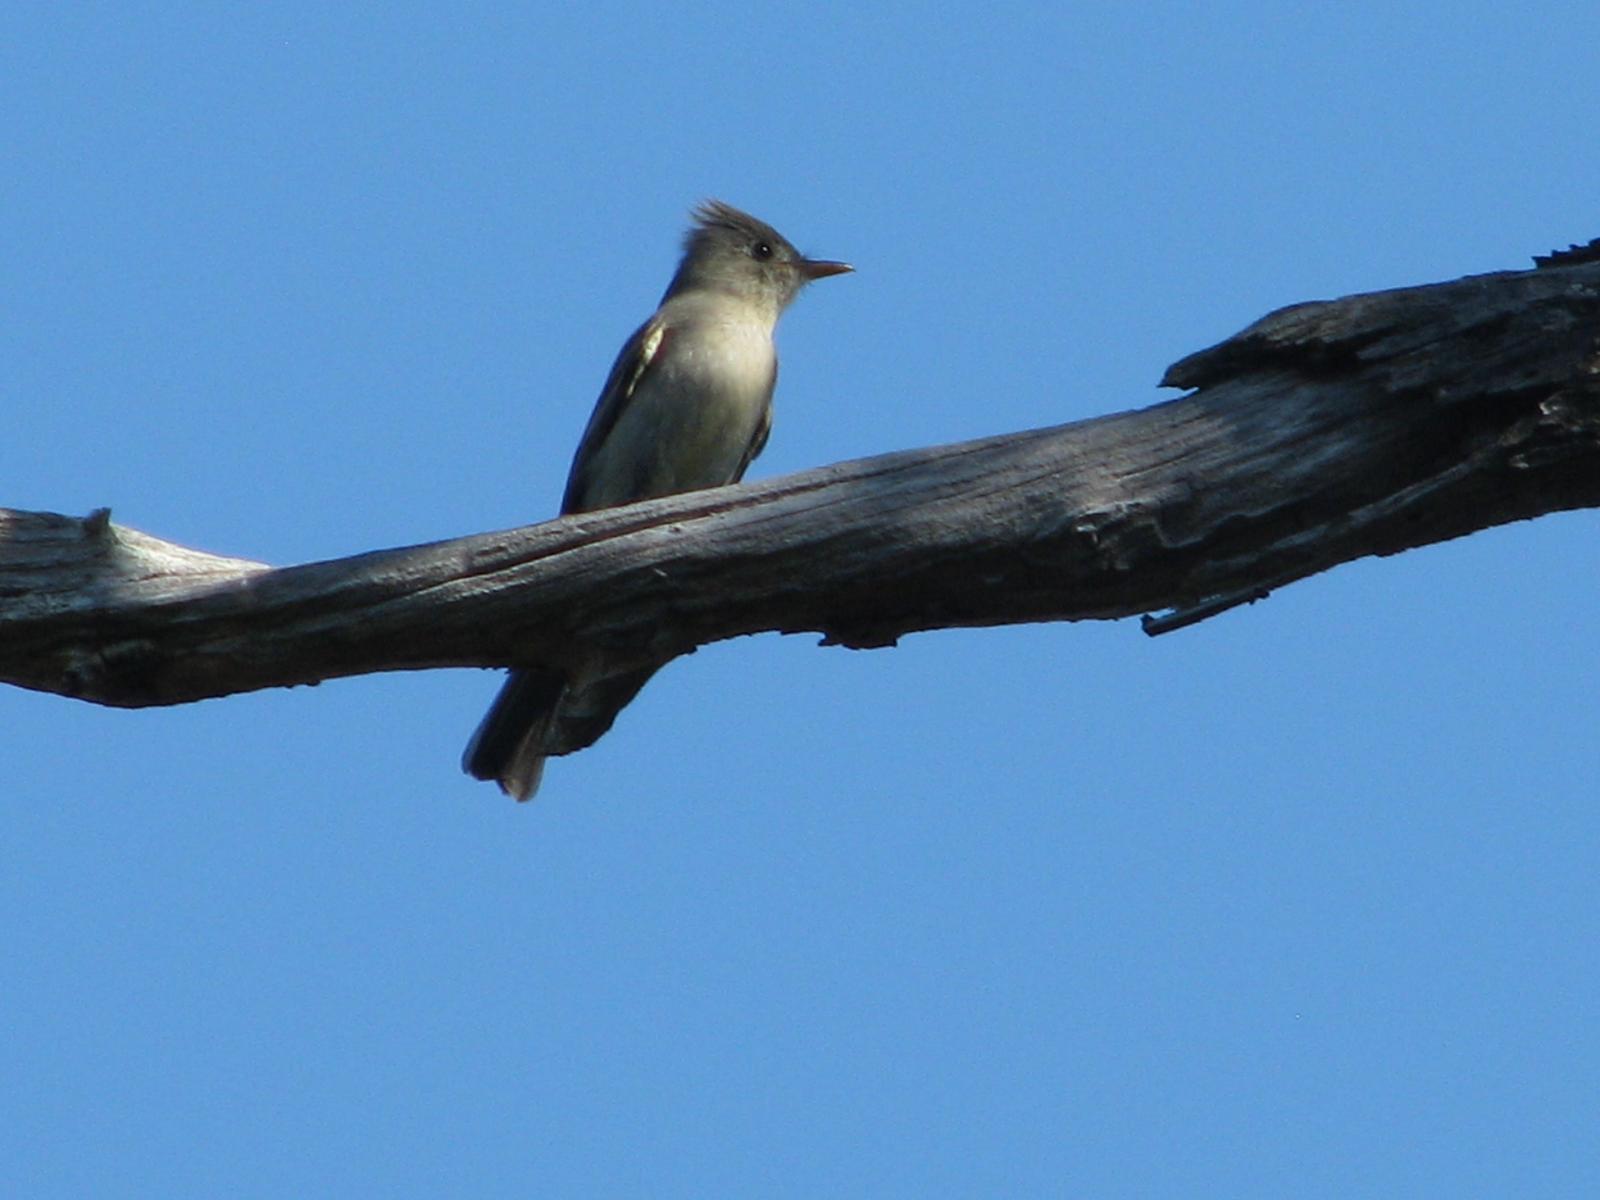 Greater Pewee Photo by Ted Goshulak